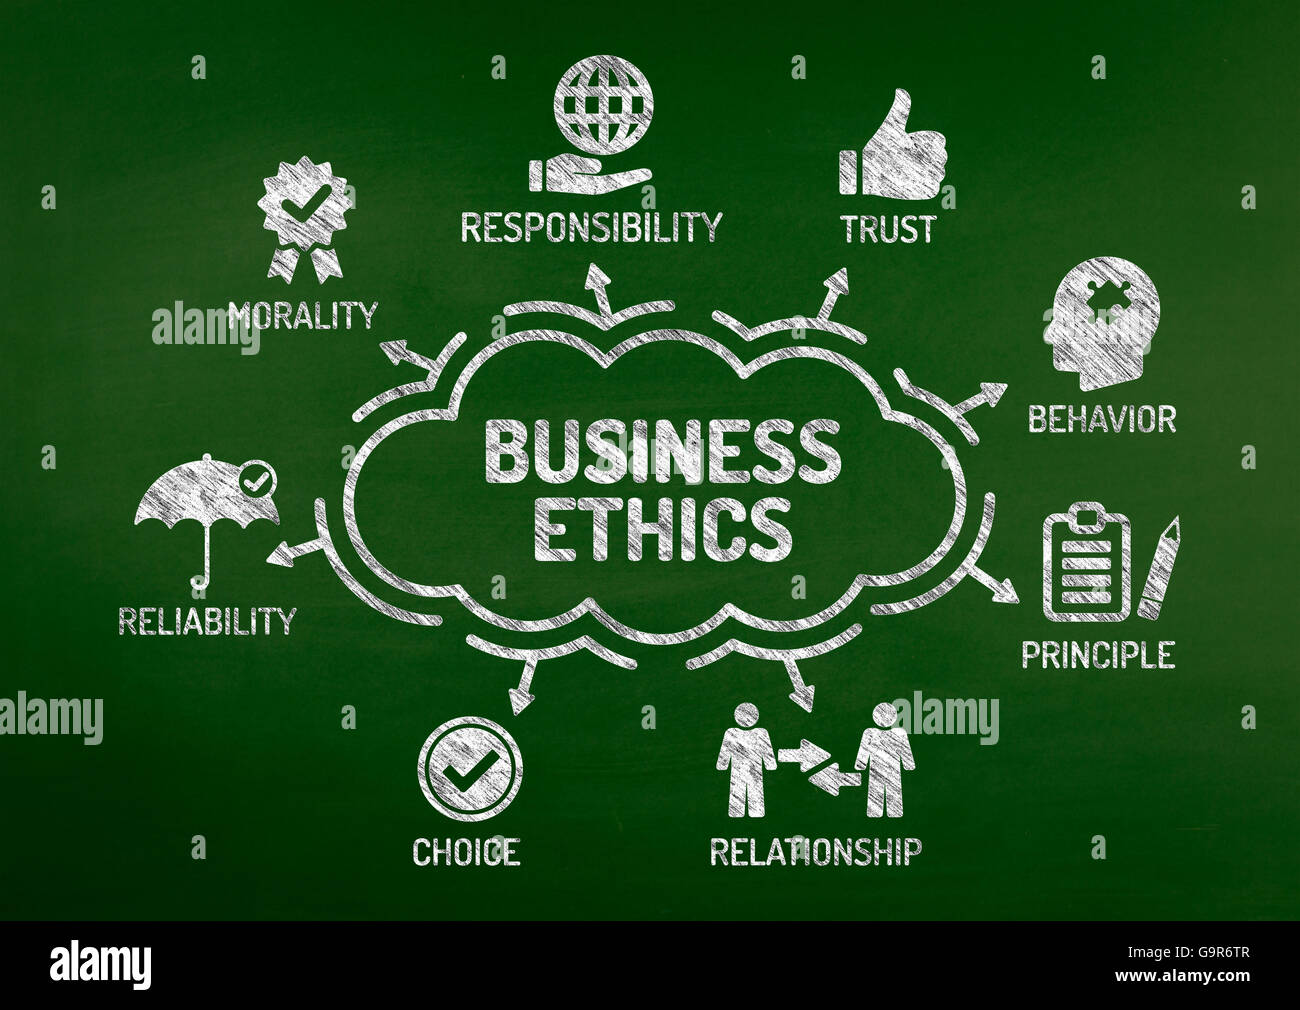 Business Ethics Chart with keywords and icons on blackboard Stock Photo